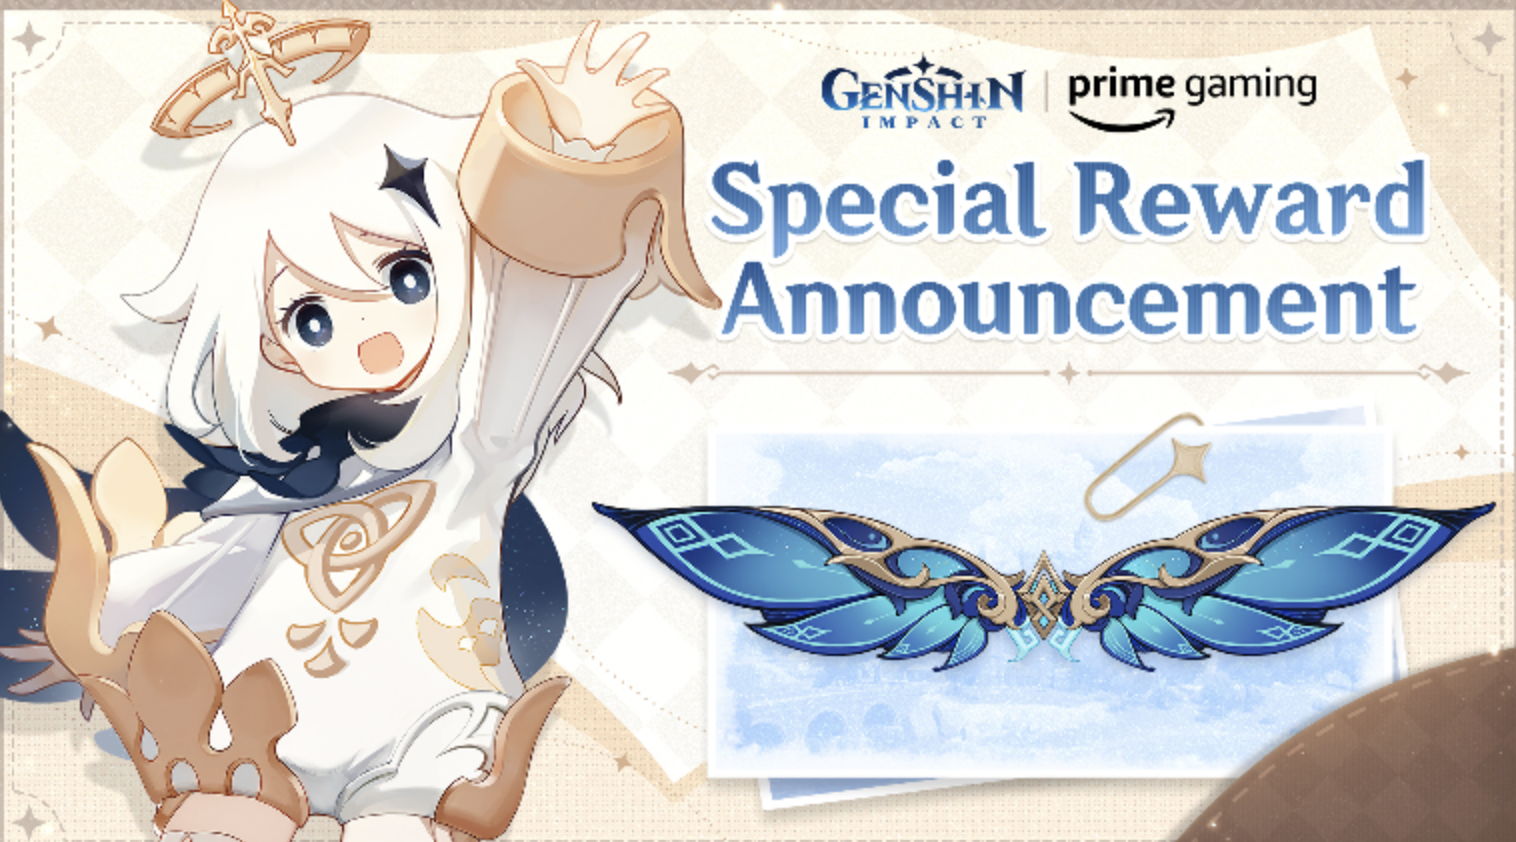 If subscribers claim at least four of the Amazon Prime Gaming Genshin Impact drops, they'll get a Wind Glider skin.